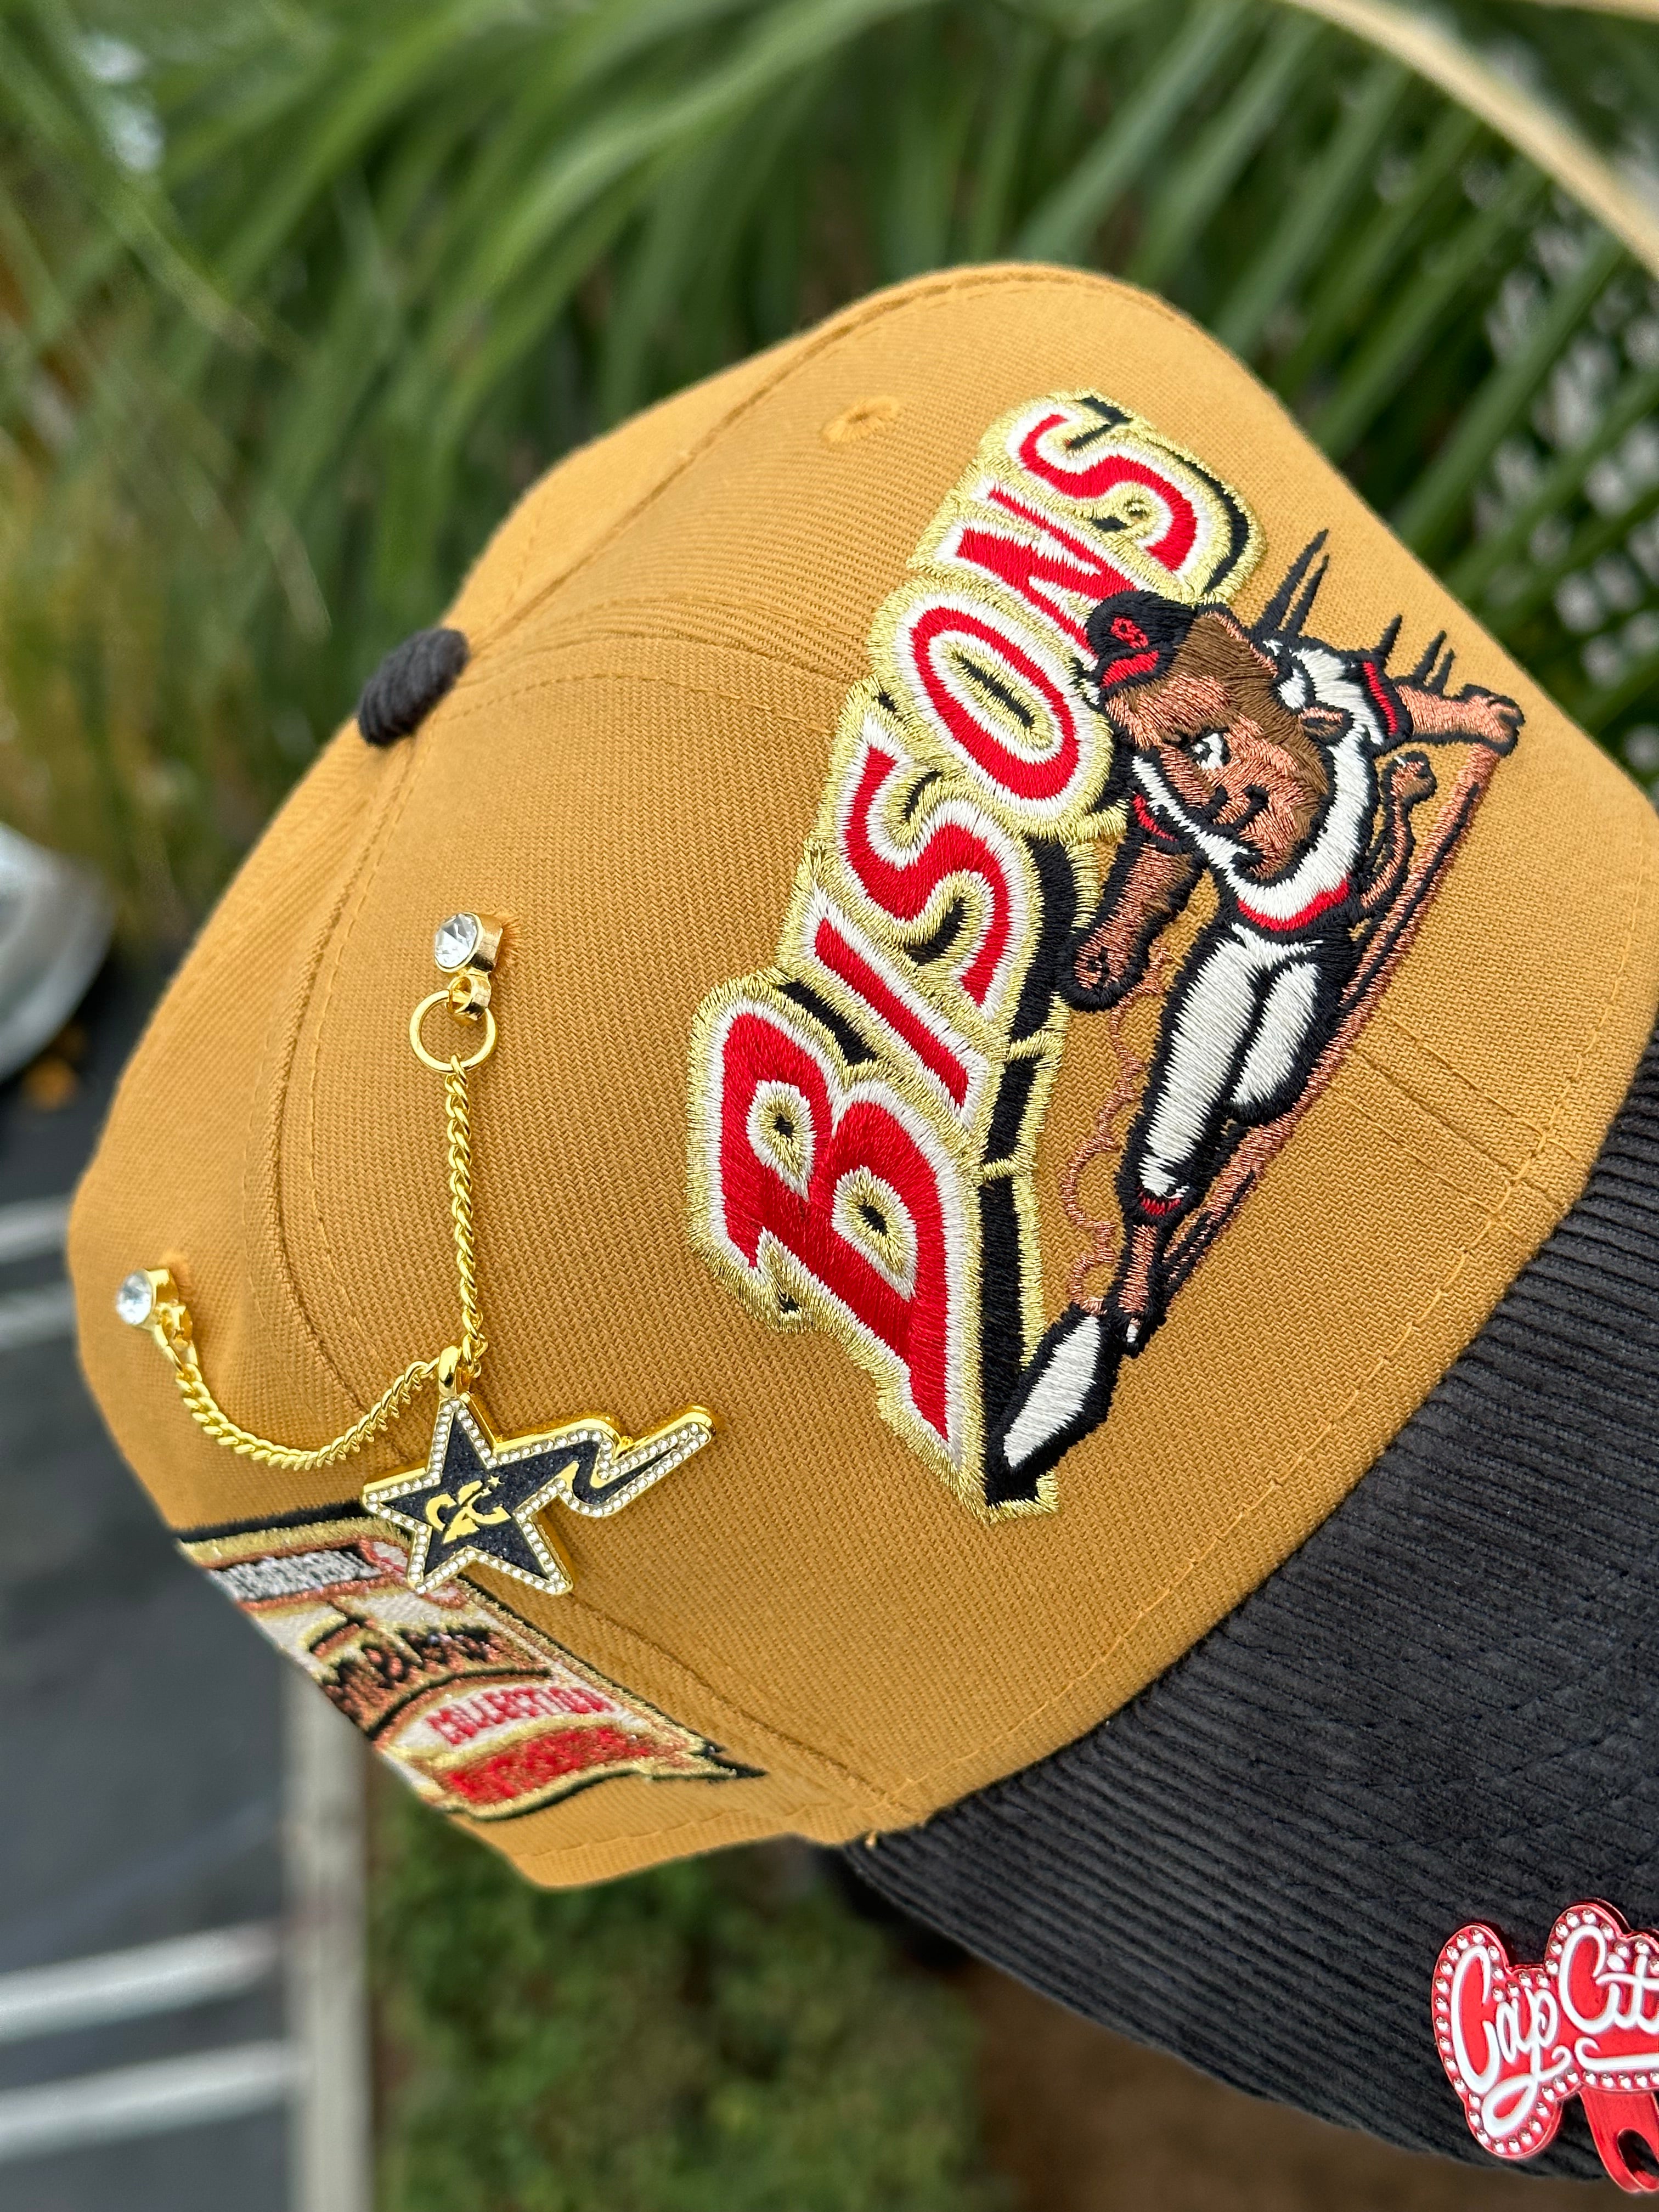 NEW ERA EXCLUSIVE 59FIFTY TAN/CORDUROY BUFFALO BISONS W/ HOMETOWN COLLECTION PATCH